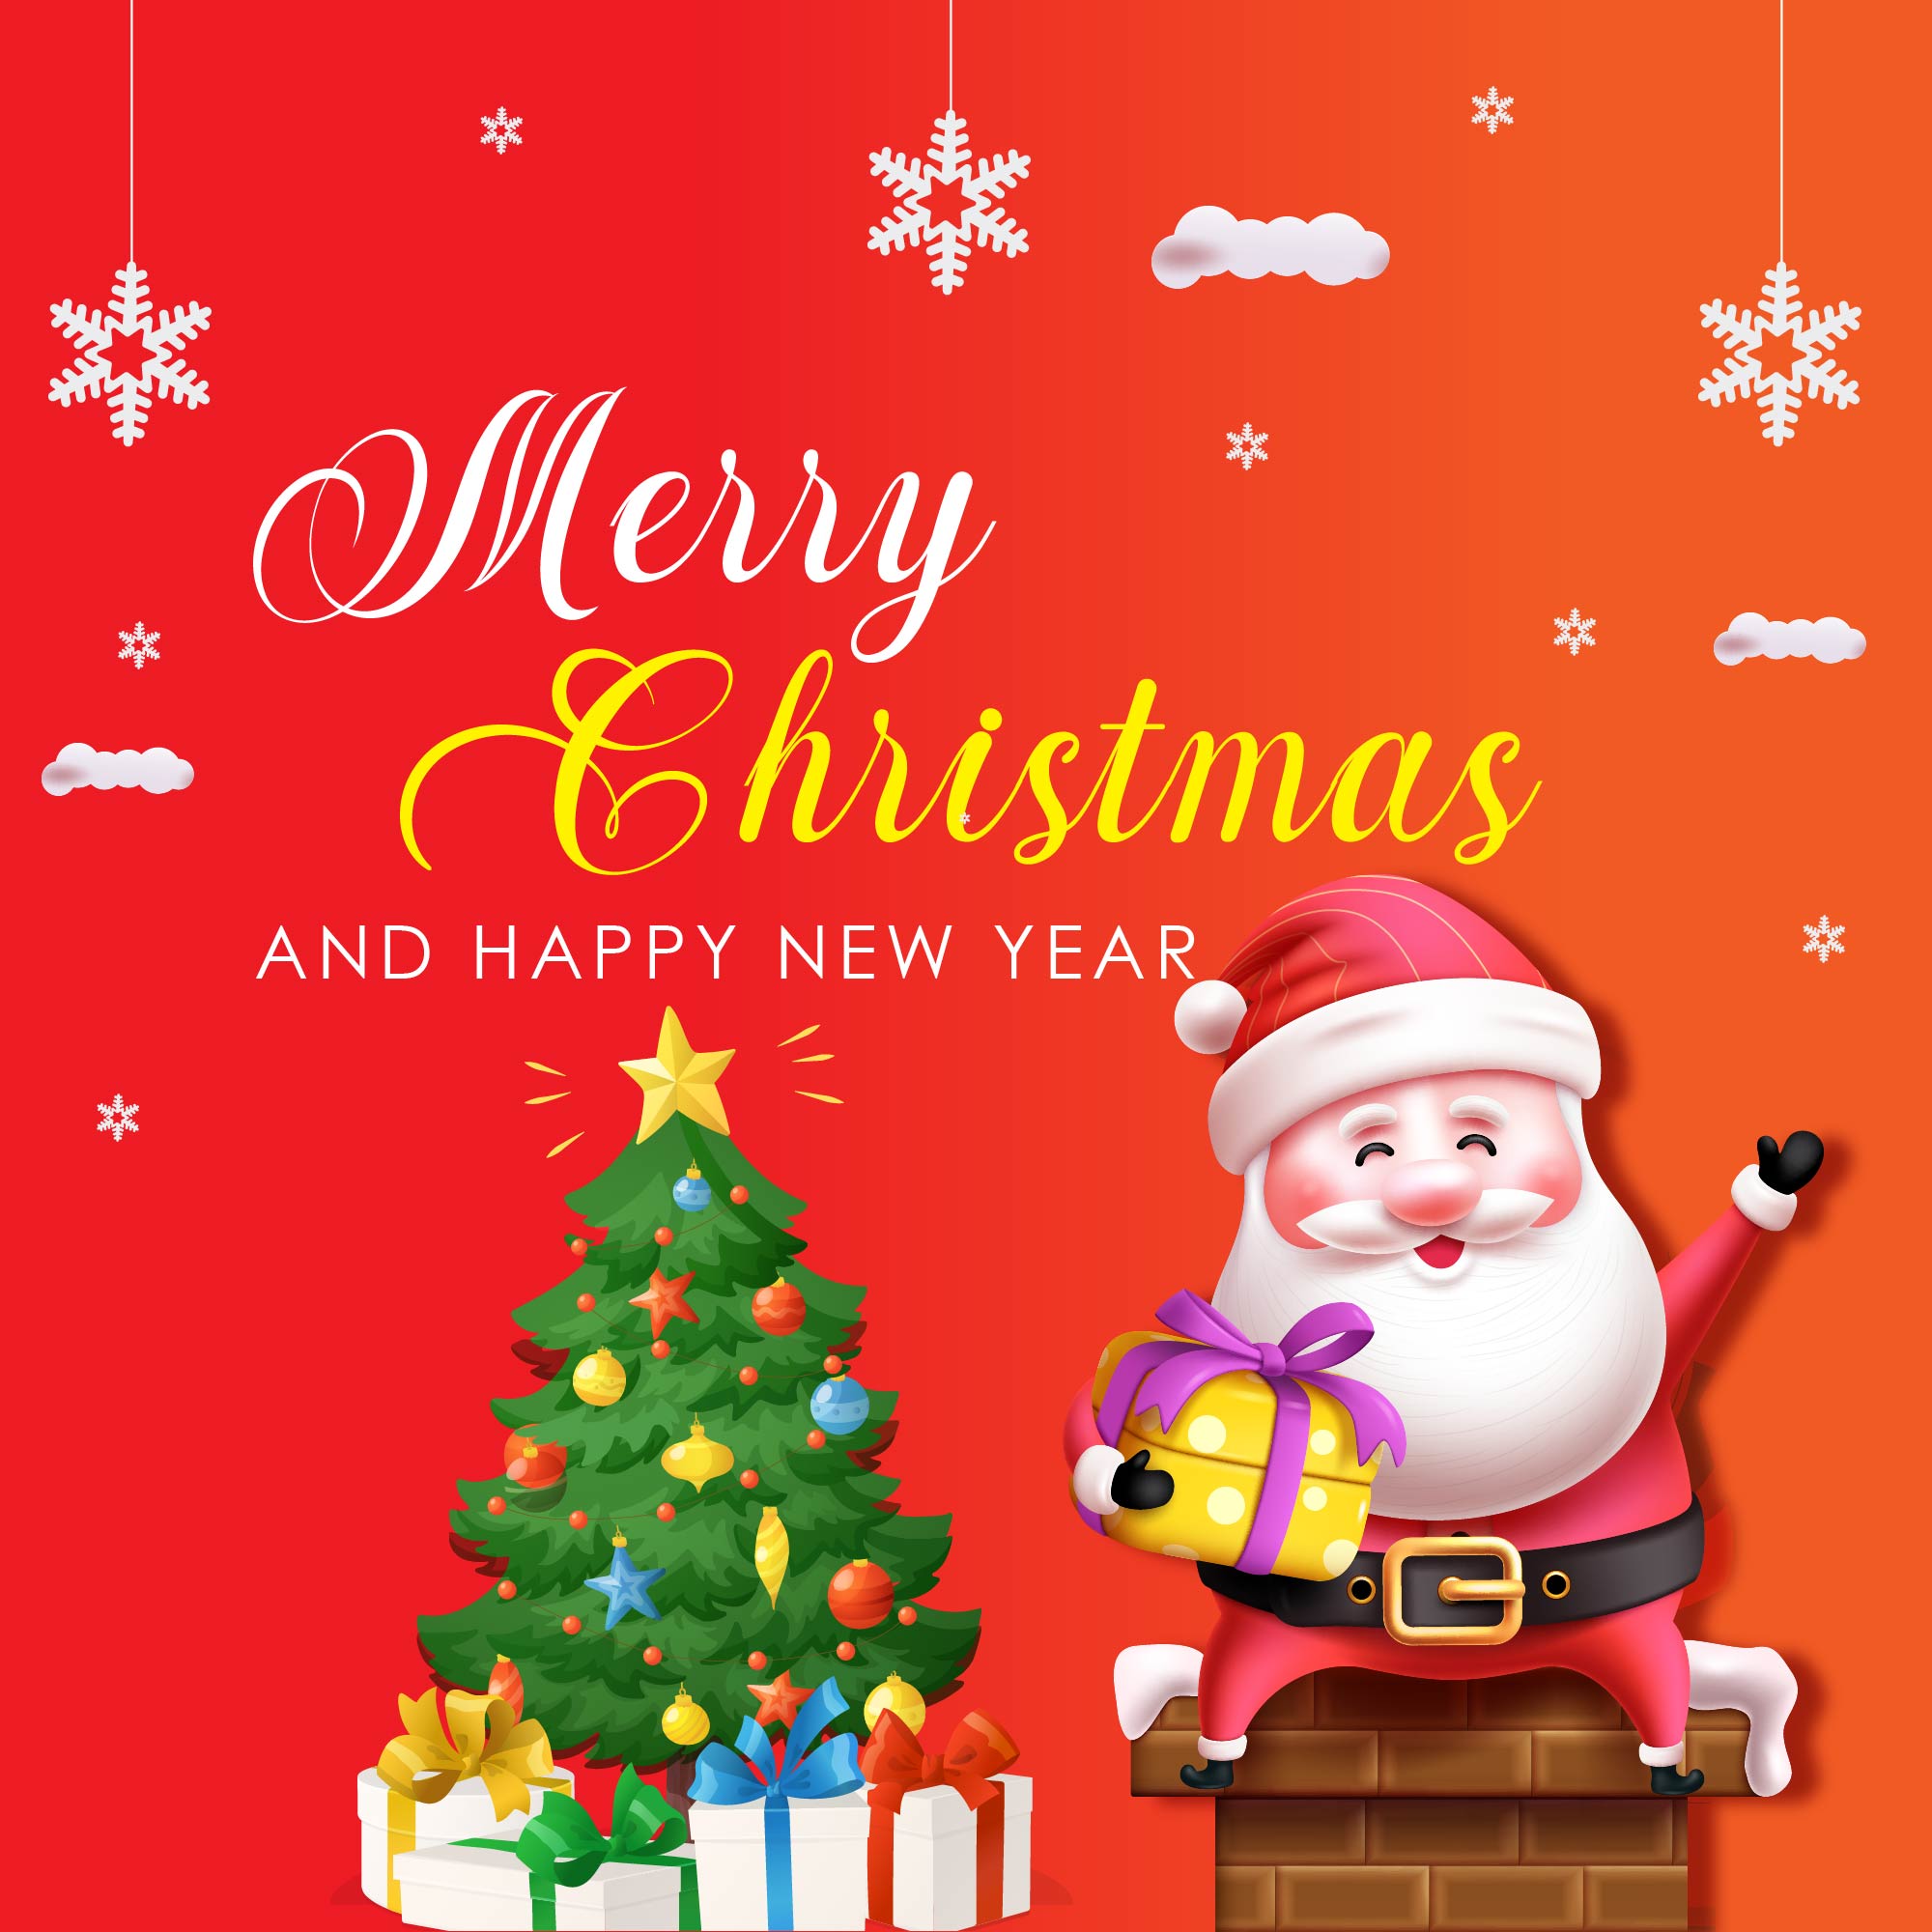 christmas vector characters like santa claus holding gift with merry christmas greeting and tree in a red and orange background. vector illustration 01 512